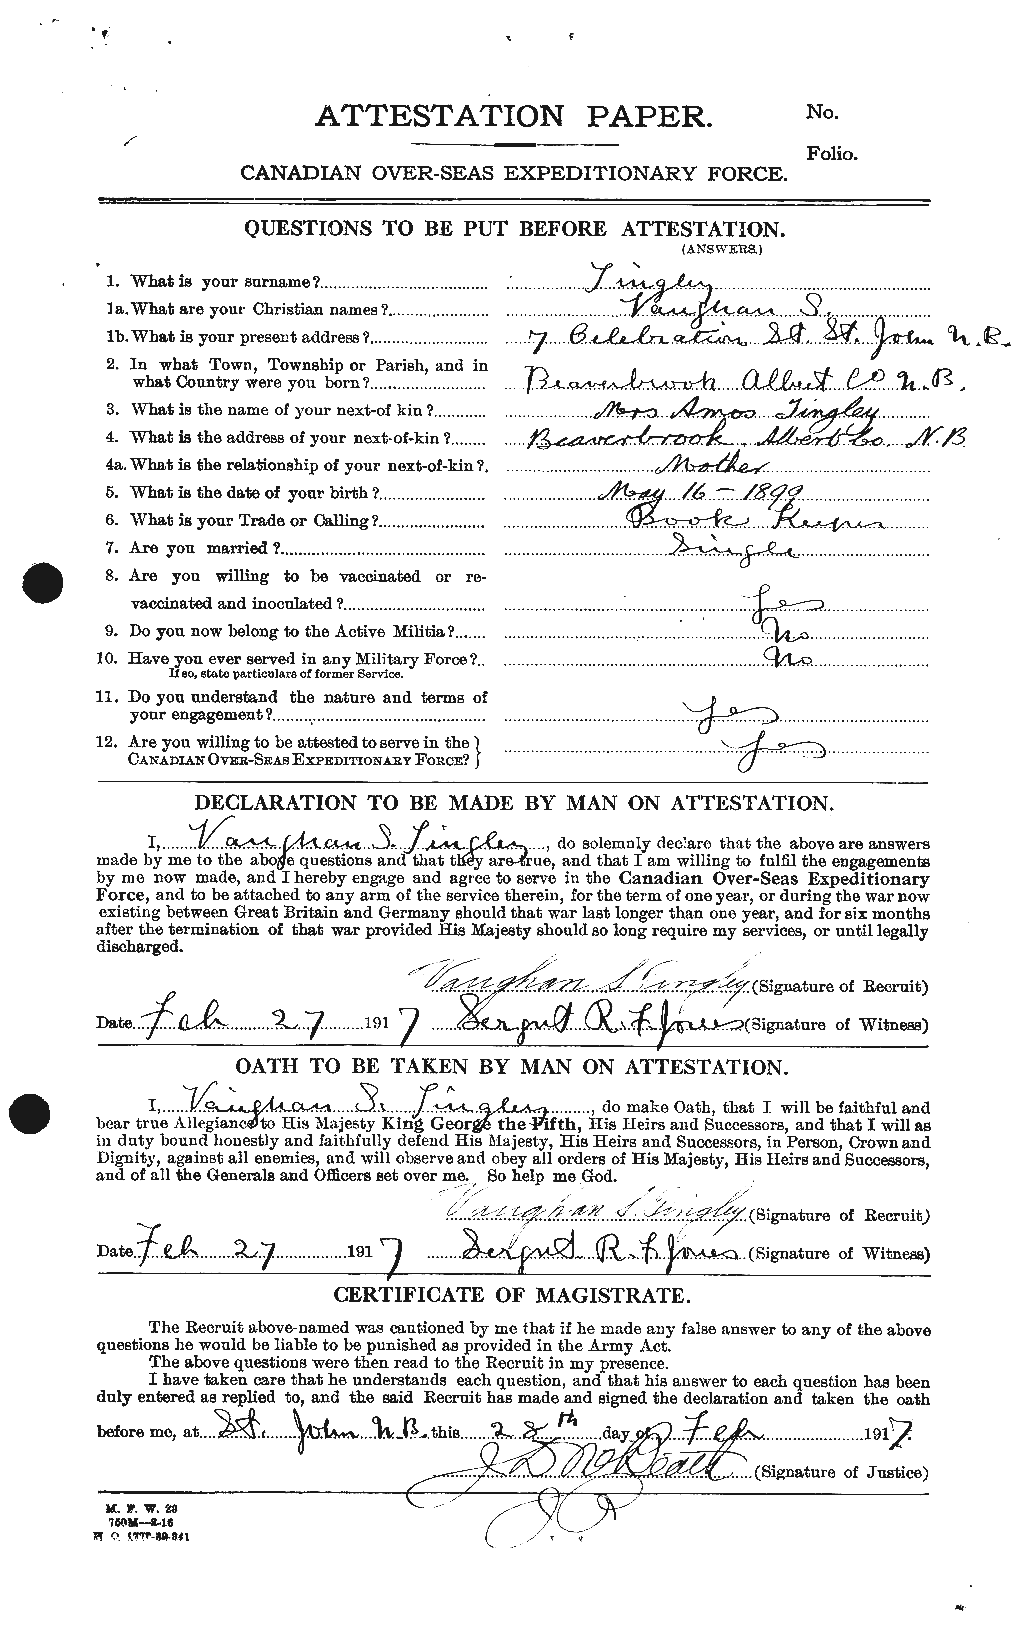 Personnel Records of the First World War - CEF 634636a